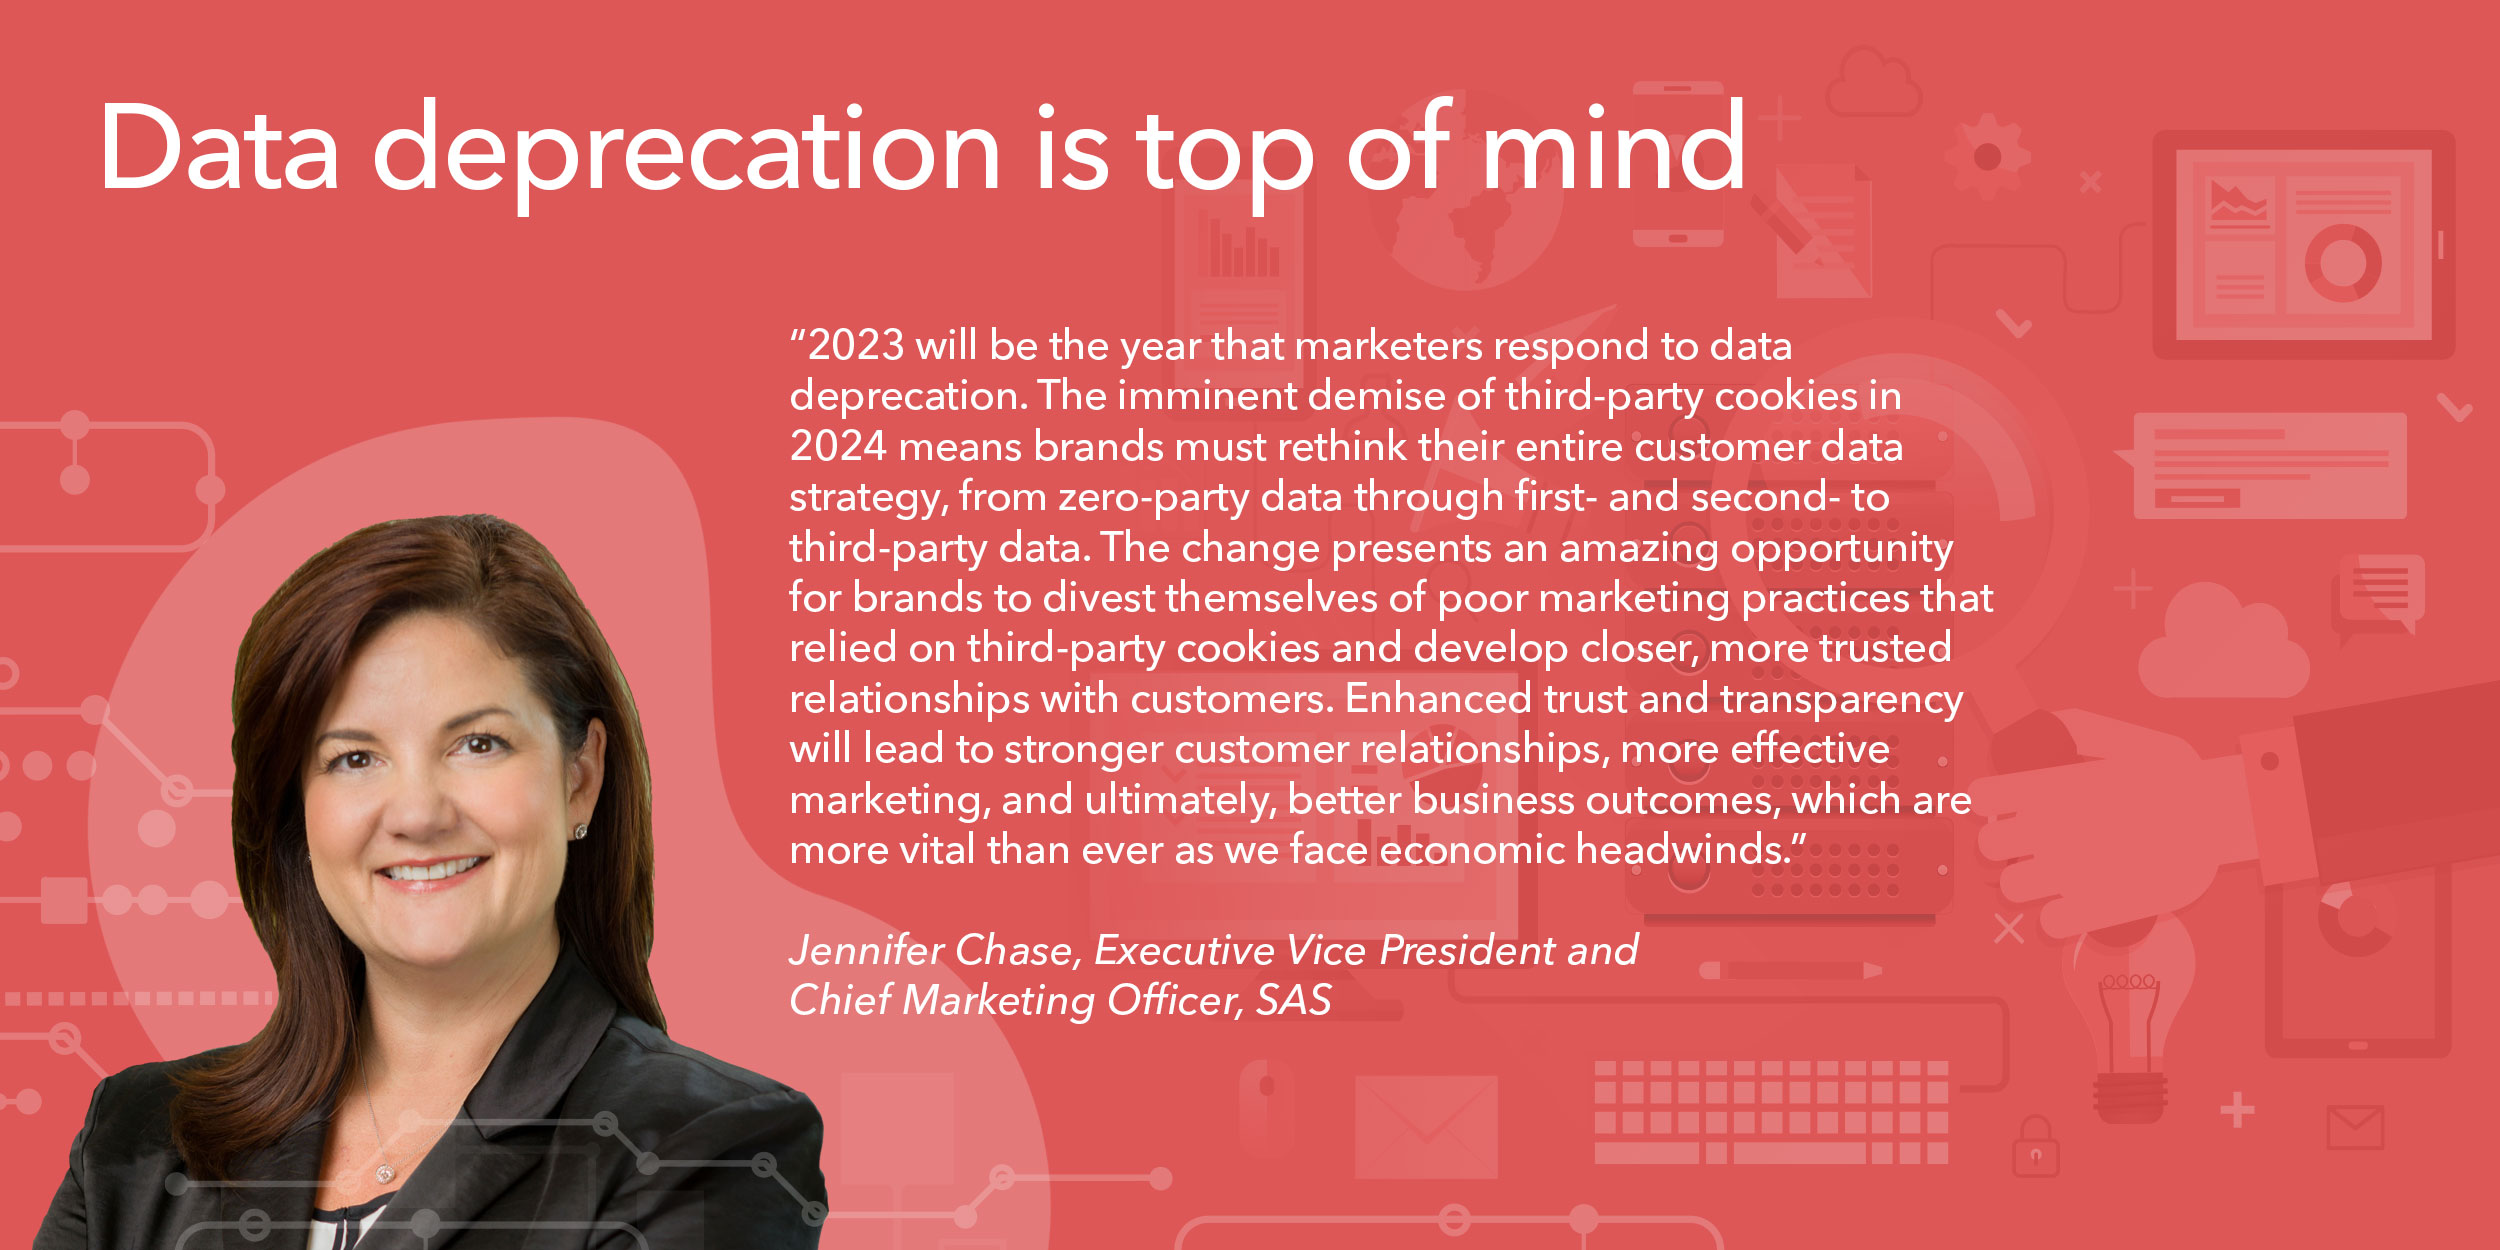 2023 will be the year that marketers respond to data deprecation. The imminent demise of third-party cookies in 2024 means brands must rethink their entire customer data strategy, from zero-party data through first- and second- to third-party data. The change presents an amazing opportunity for brands to divest themselves of poor marketing practices that relied on third-party cookies and develop closer, more trusted relationships with customers. Enhanced trust and transparency will lead to stronger customer relationships, more effective marketing, and ultimately, better business outcomes, which are more vital than ever as we face economic headwinds. 